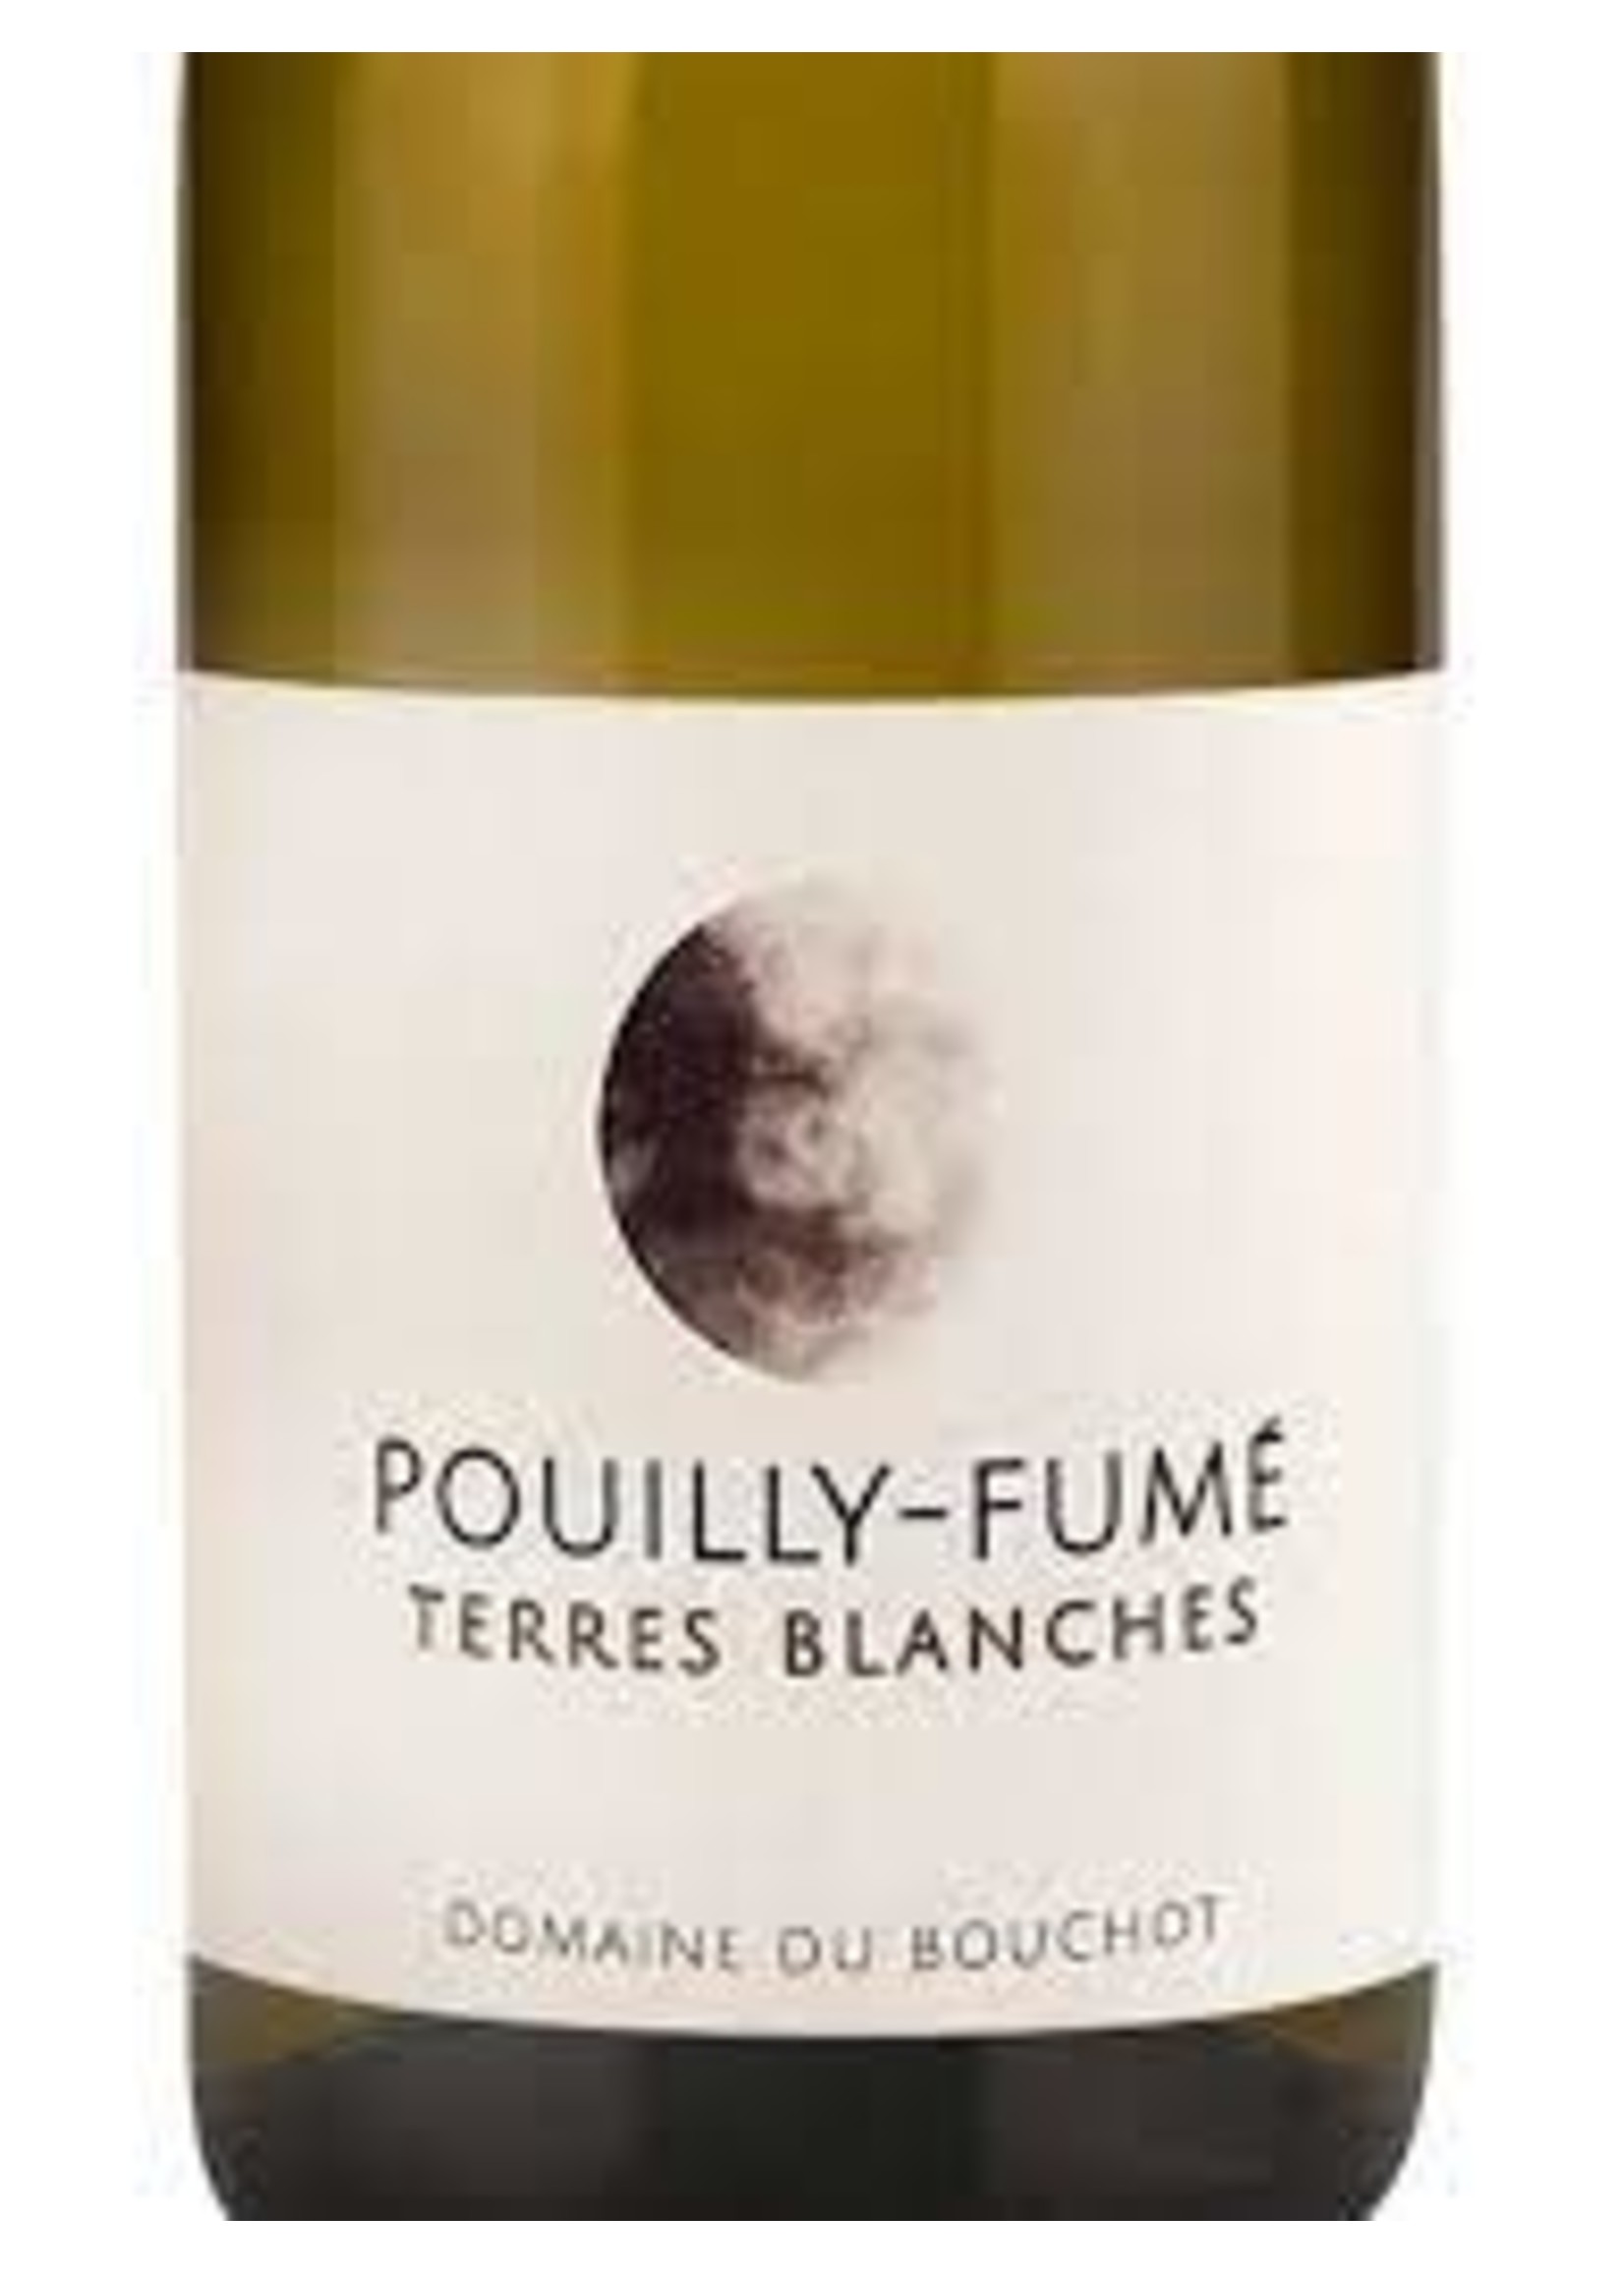 Domaine du Bouchot 2020 Pouilly-Fume 'Terres Blanches' 750ml